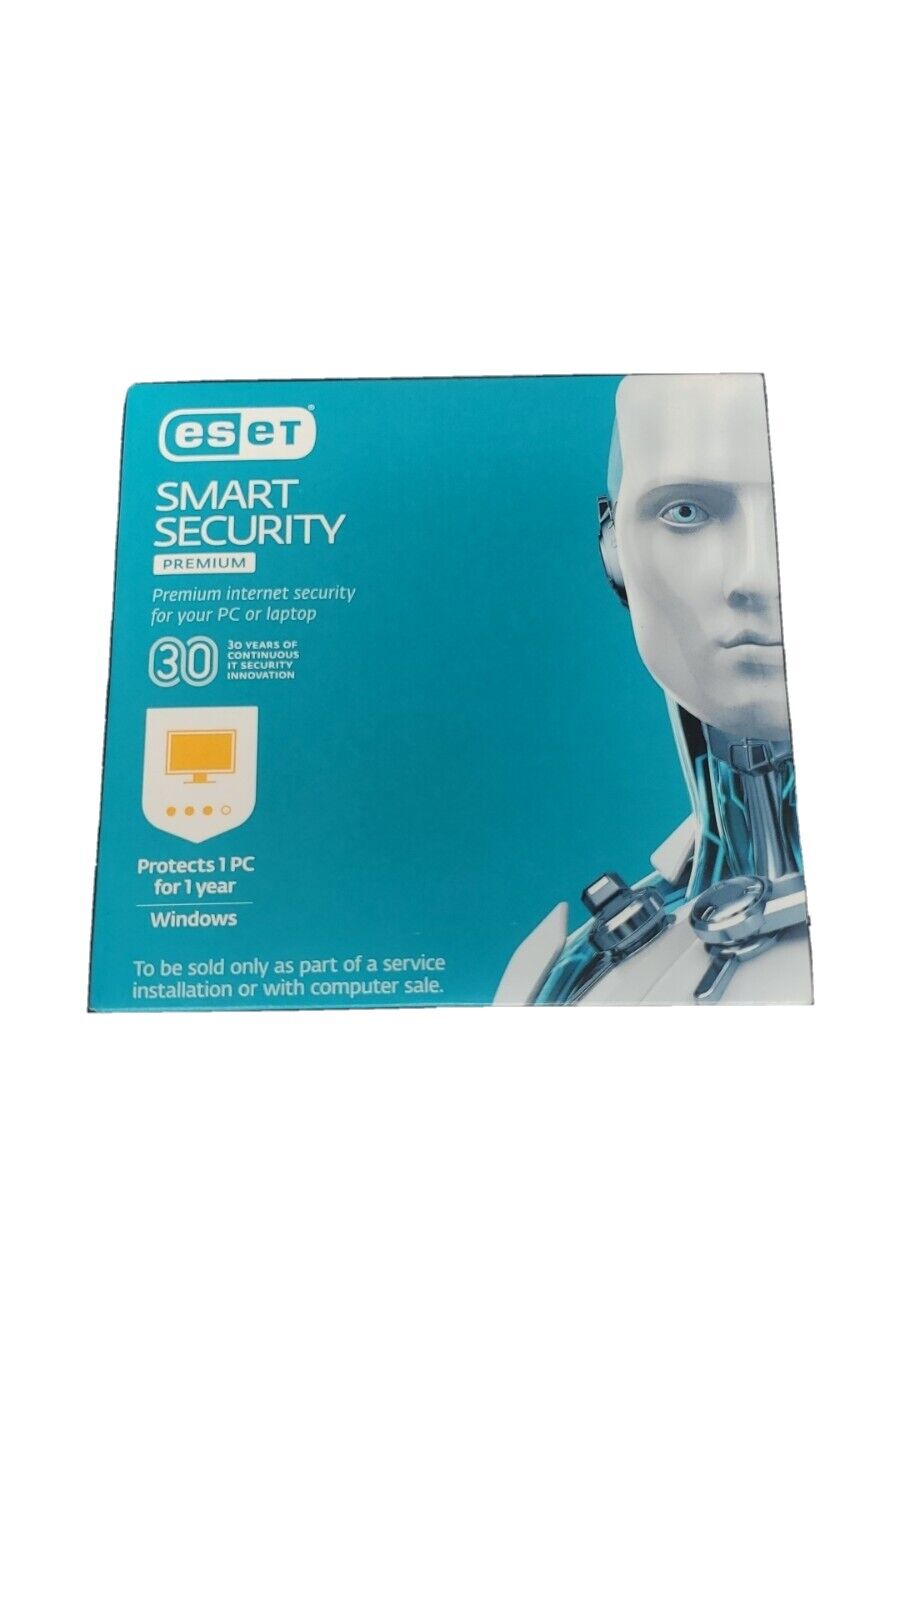 ESET Smart Security Premium 1 Year 1 PC Or Laptop OEM CD And Key Card Included 